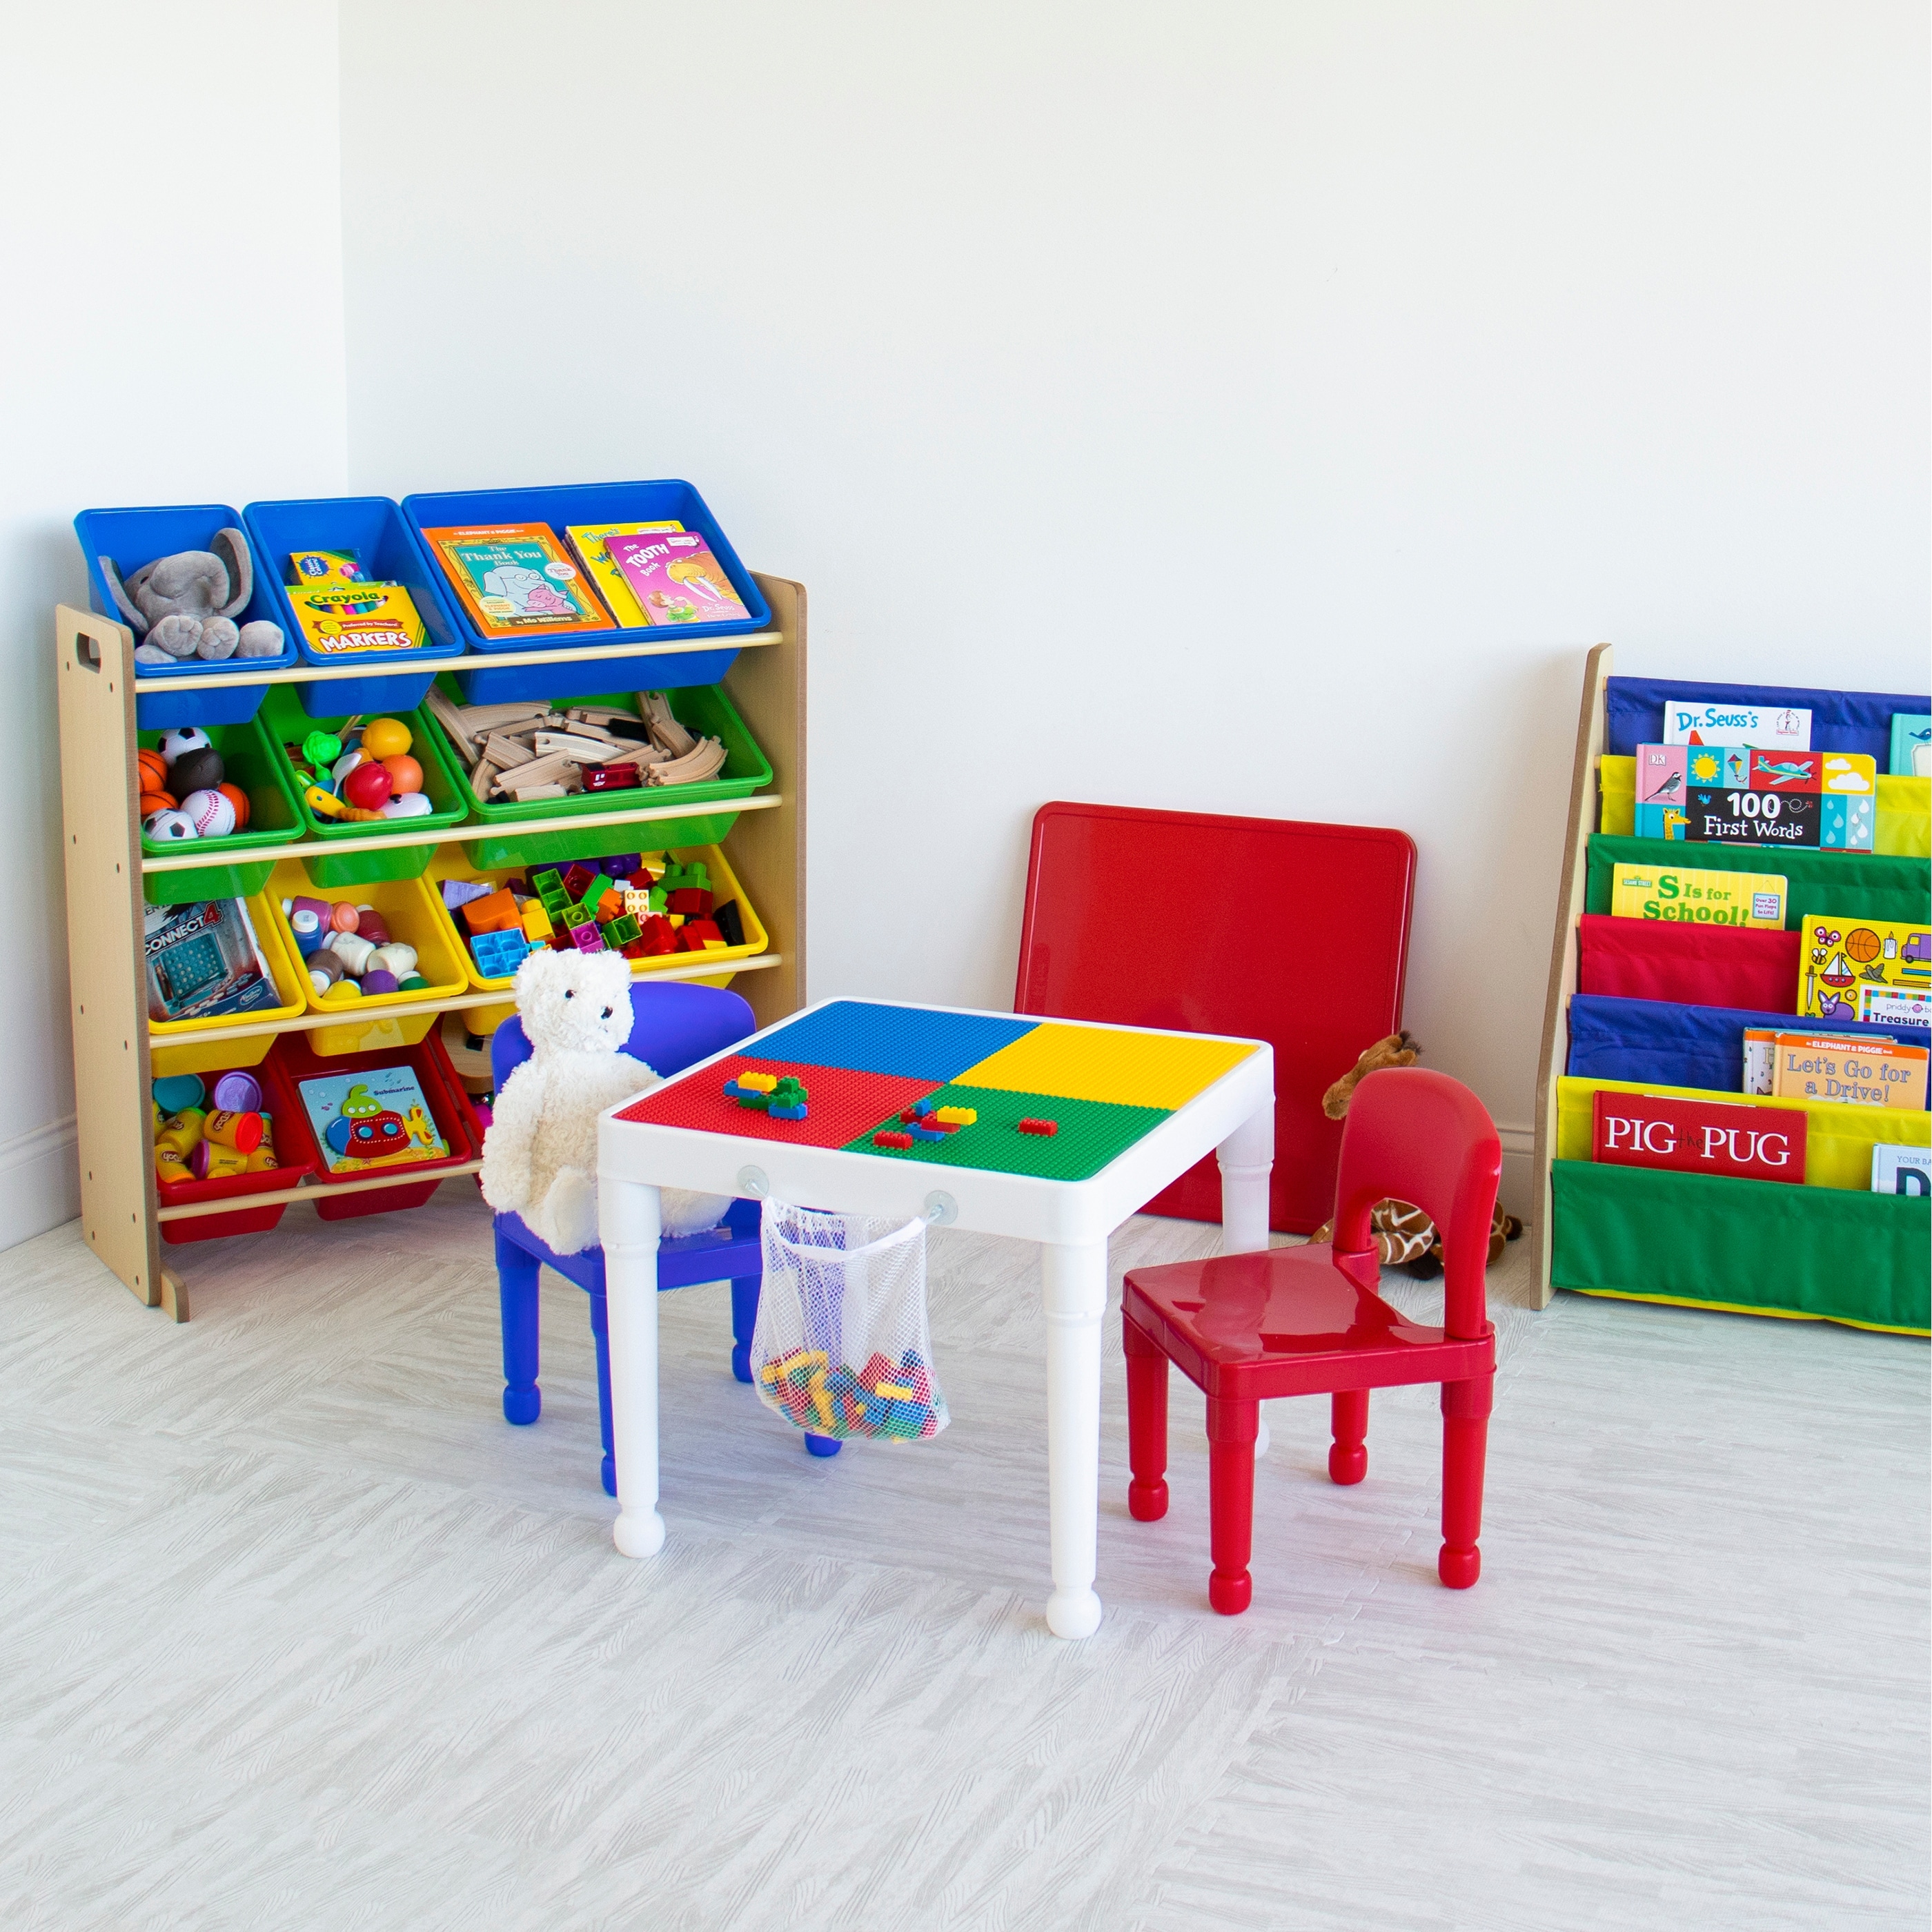 https://ak1.ostkcdn.com/images/products/is/images/direct/5de2b638c83303e049aaa77ee9a6766aa3a02d22/Tot-Tutors-Kids-Toy-Storage-Organizer-with-12-Plastic-Bins%2C-Natural-Frame-%26-Primary-Bins.jpg